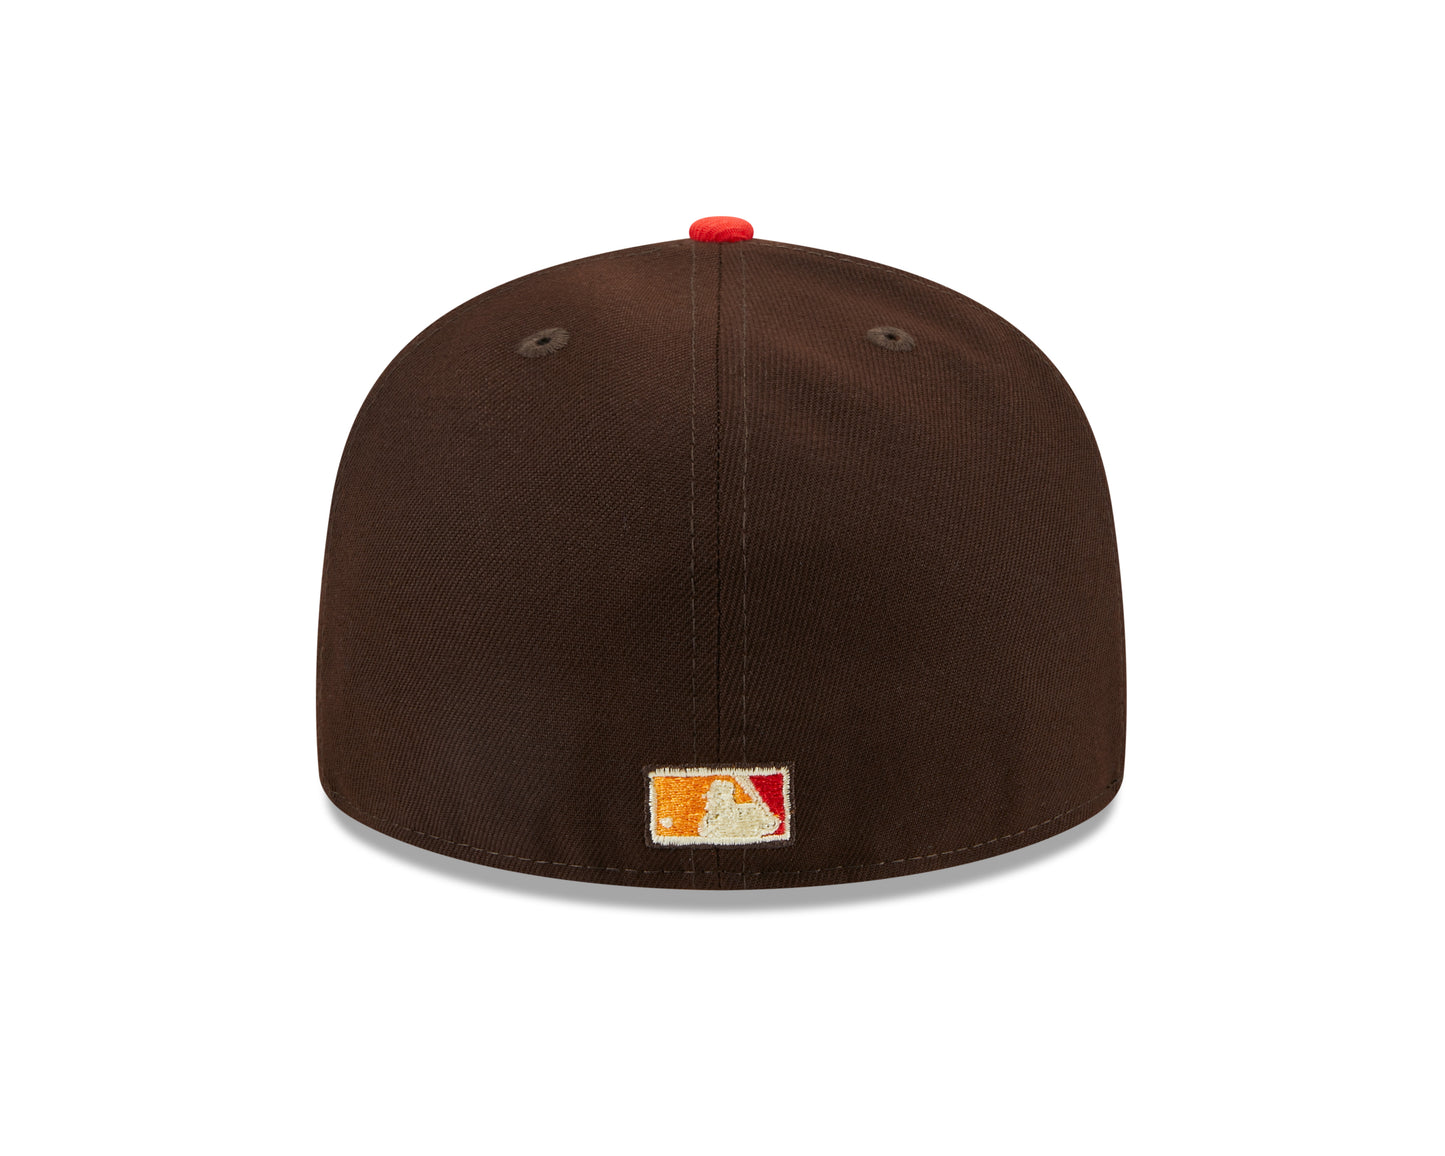 New Era 59fifty Fitted Cap Houston Astros Cooperstown THE ELEMENTS - Brown - Headz Up 